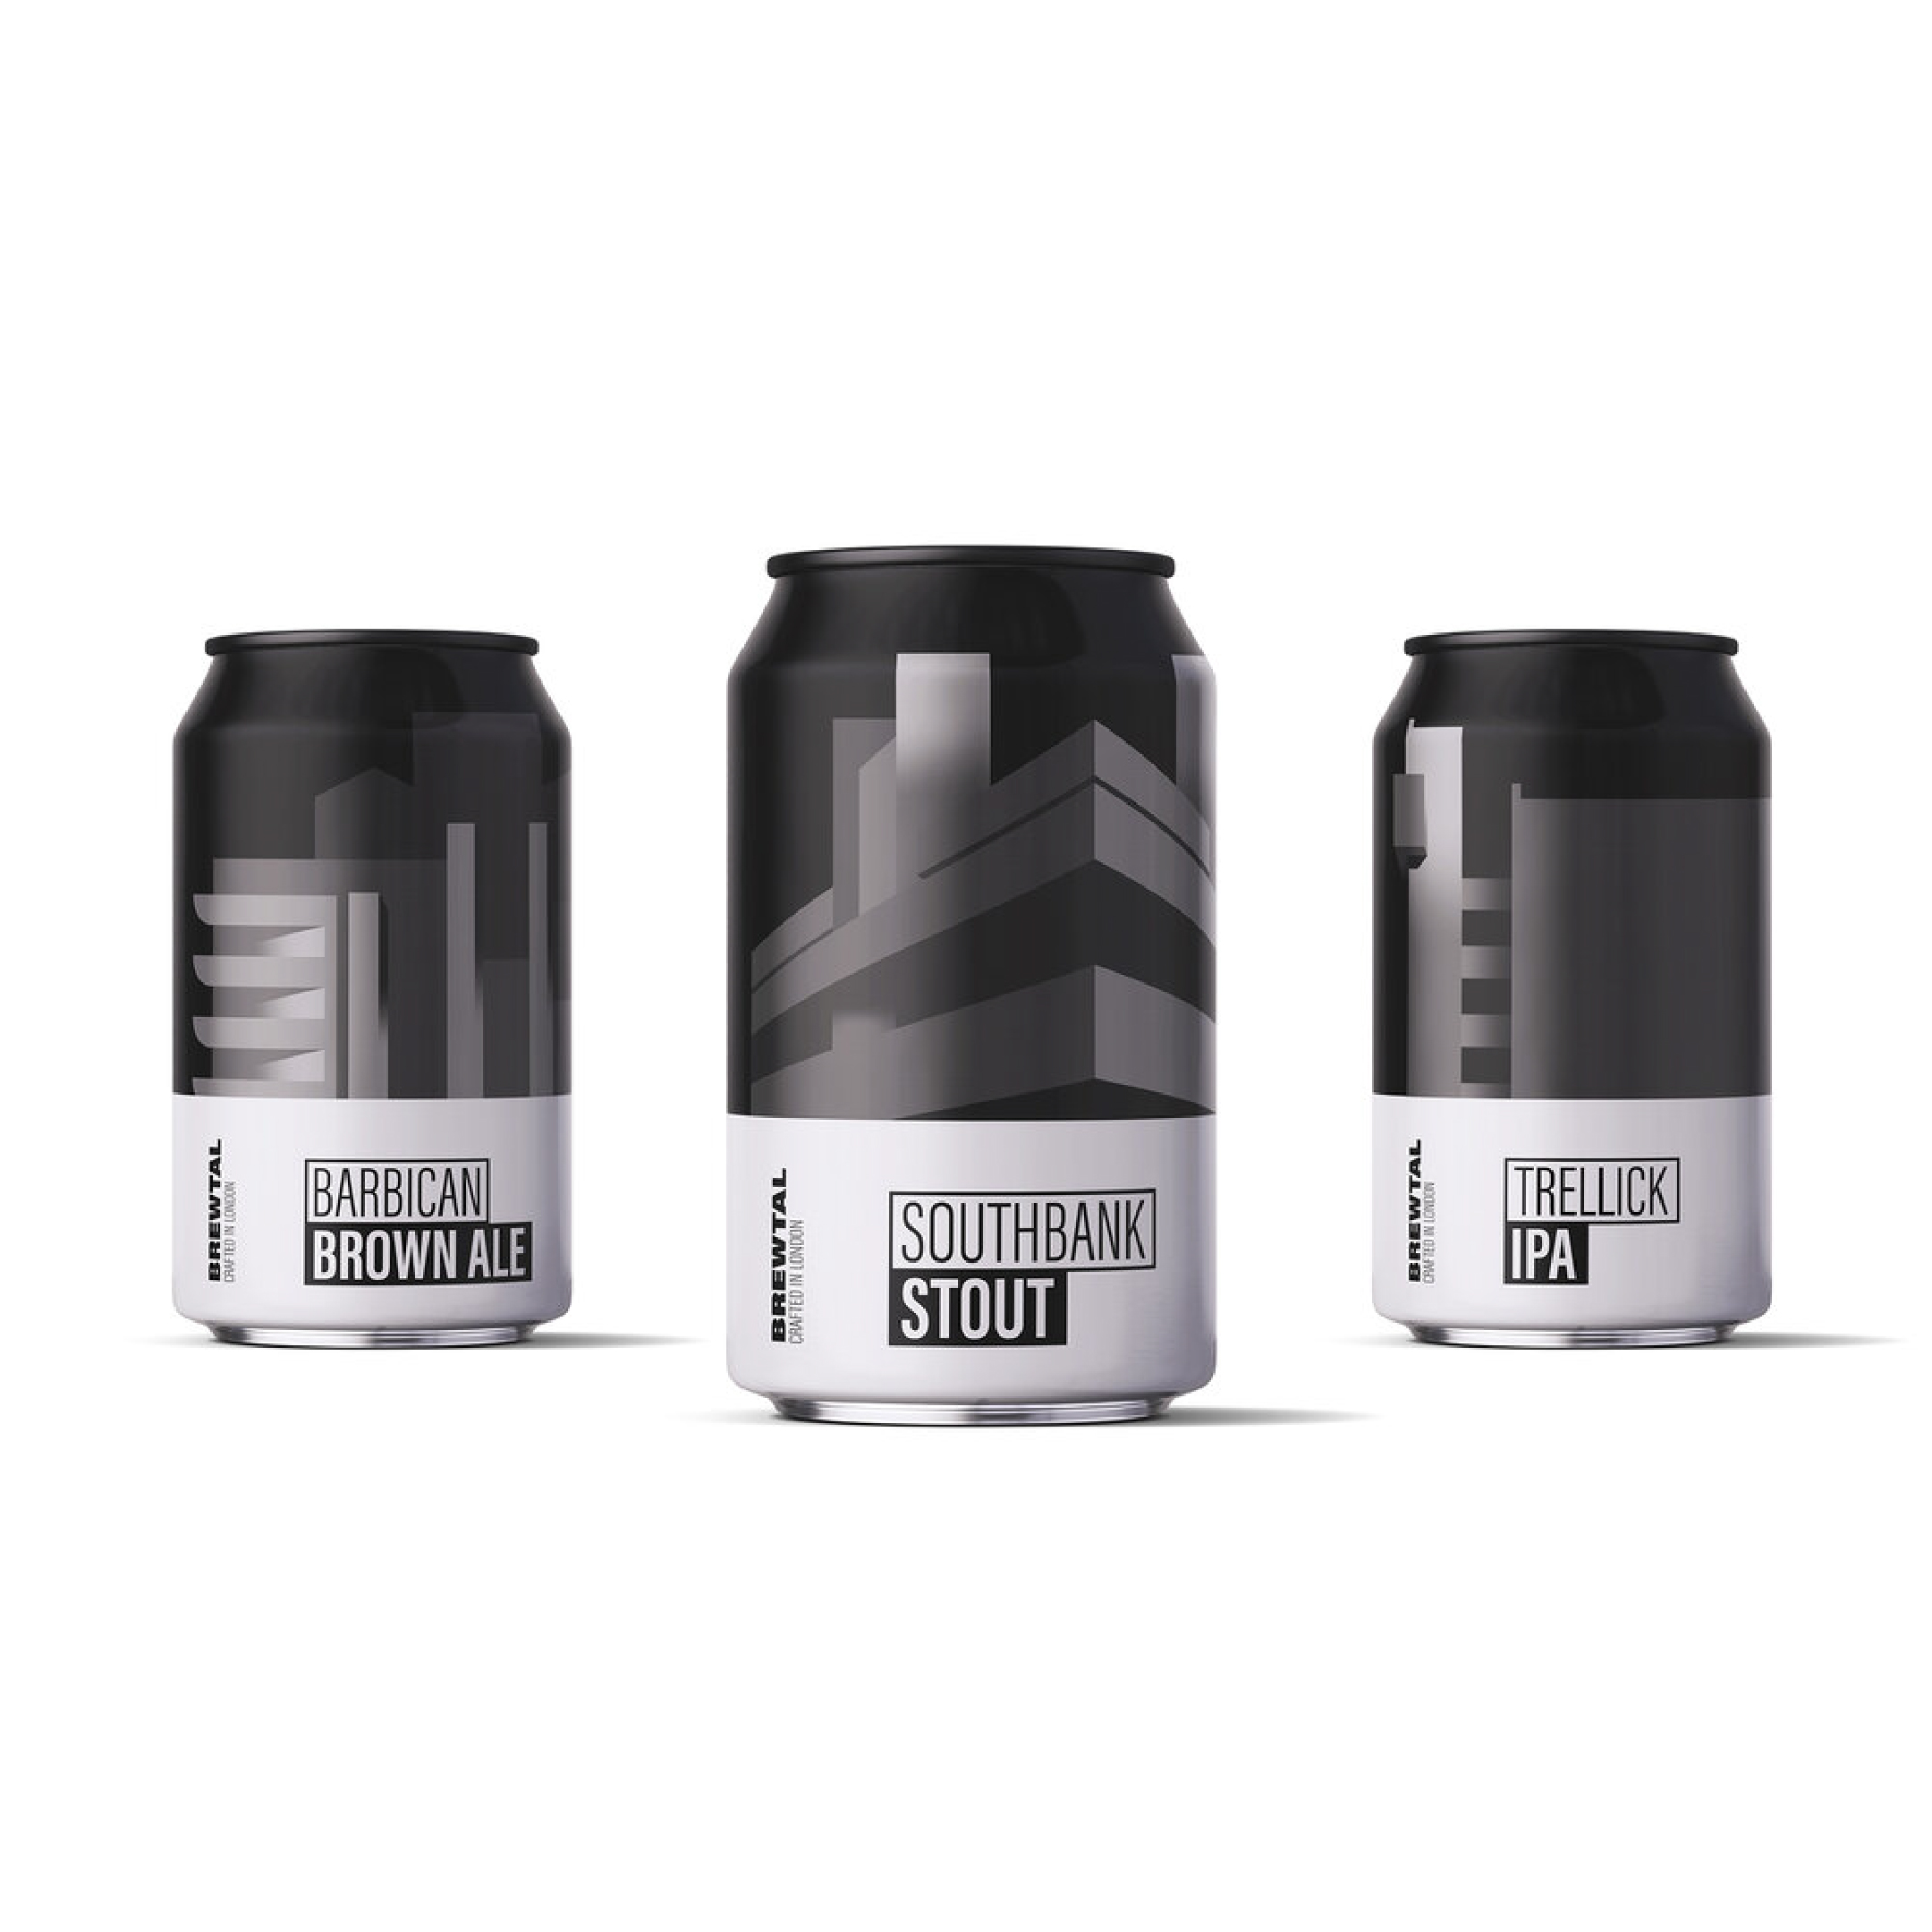 A Series of Beer Cans, Influenced by Brutalist Buildings from London